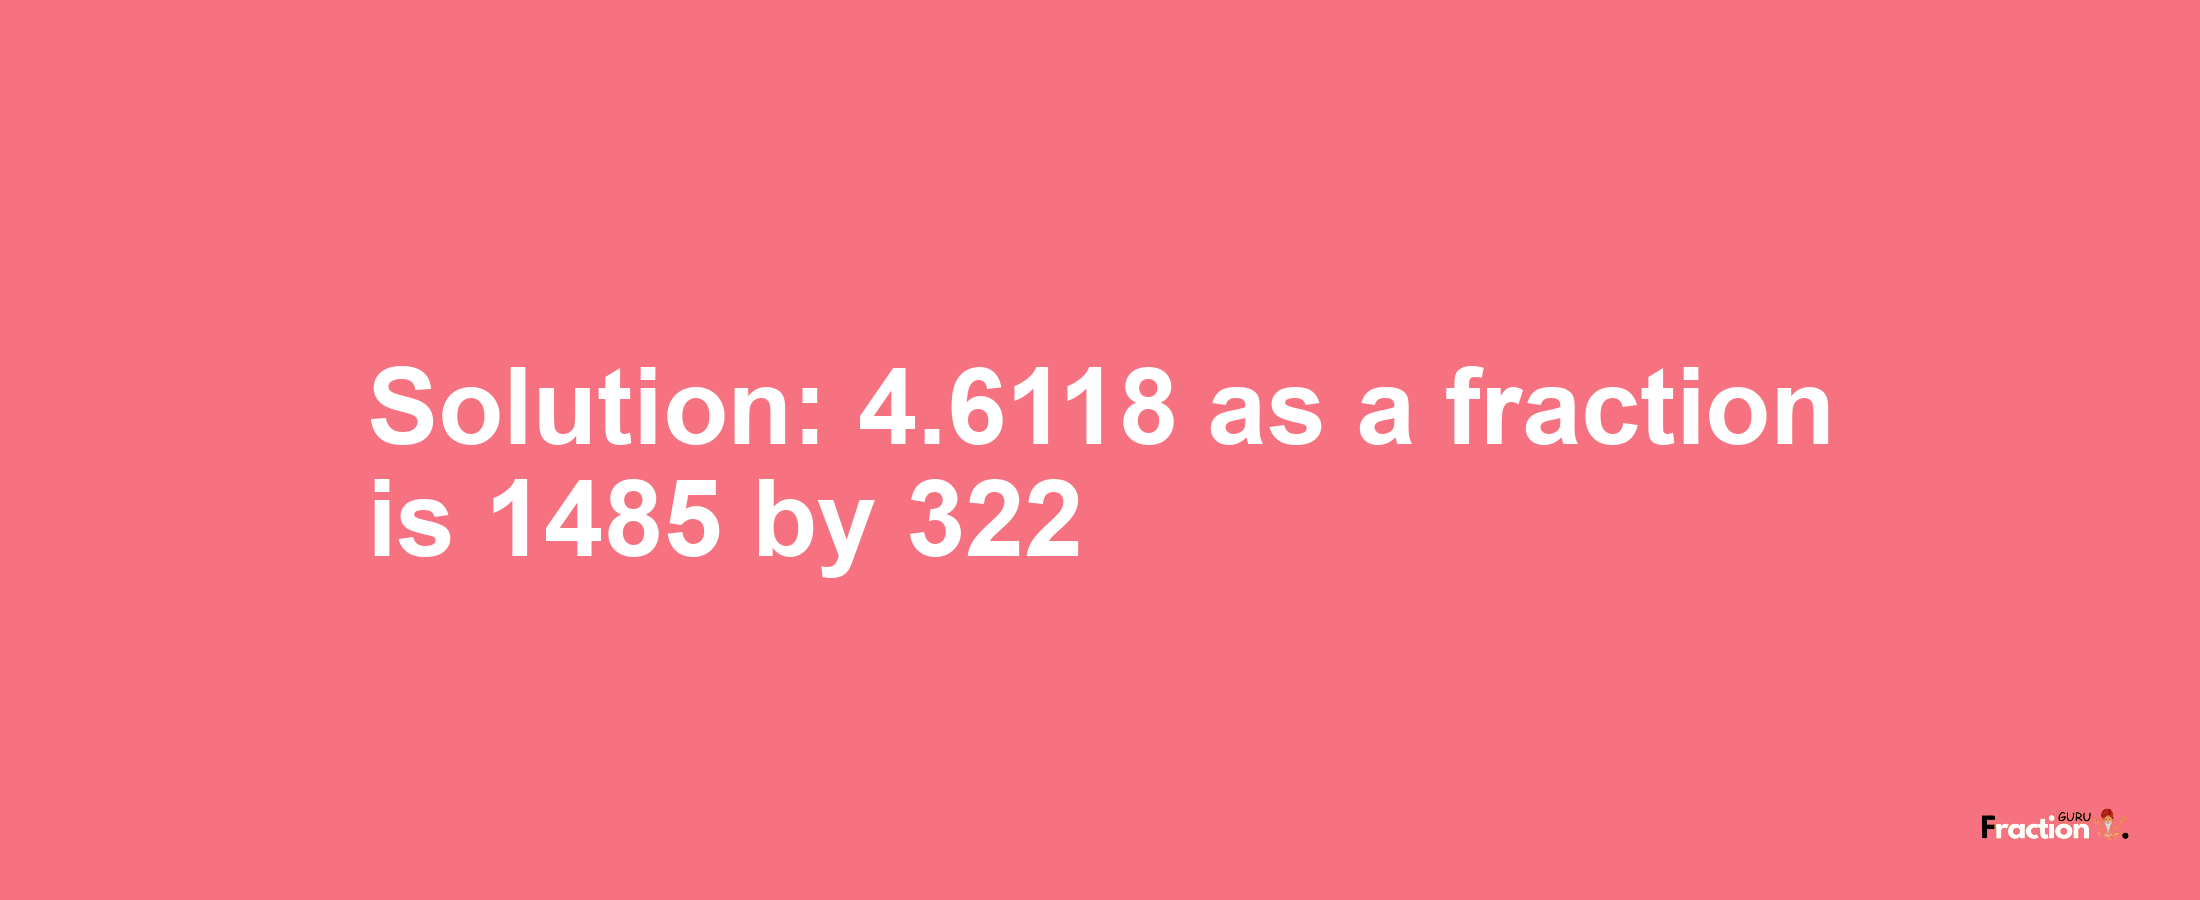 Solution:4.6118 as a fraction is 1485/322